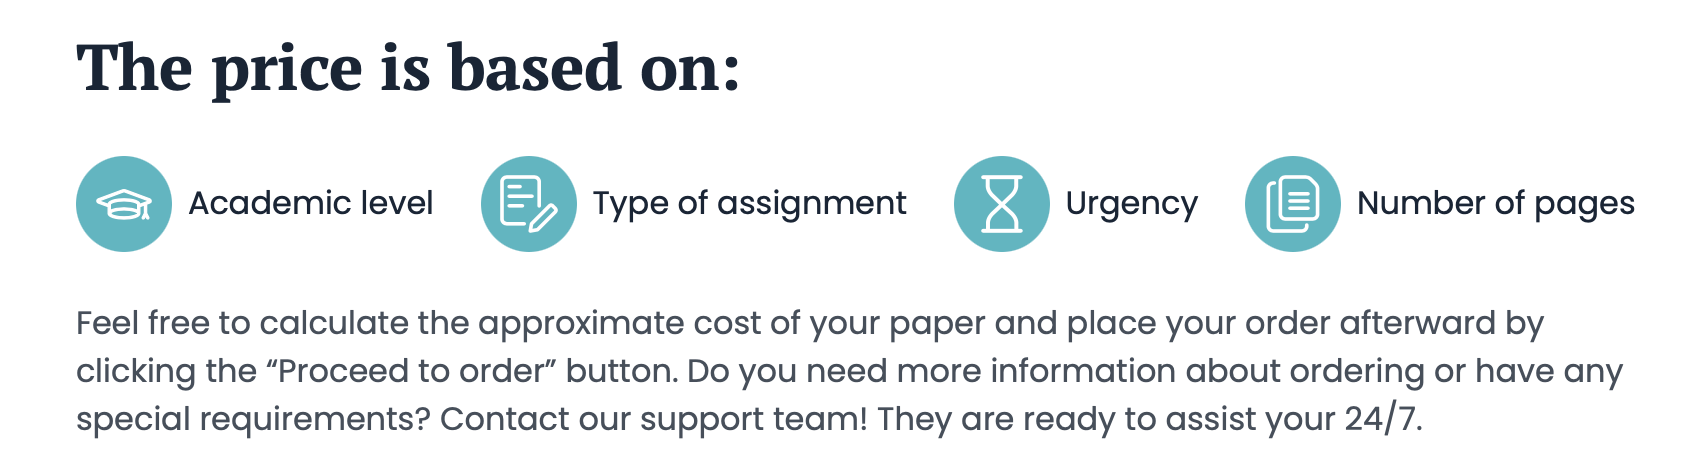 The cost of a paper on Superbpaper.com depends on academic level of my paper, the type of the assignment, the number of pages, and the deadline.